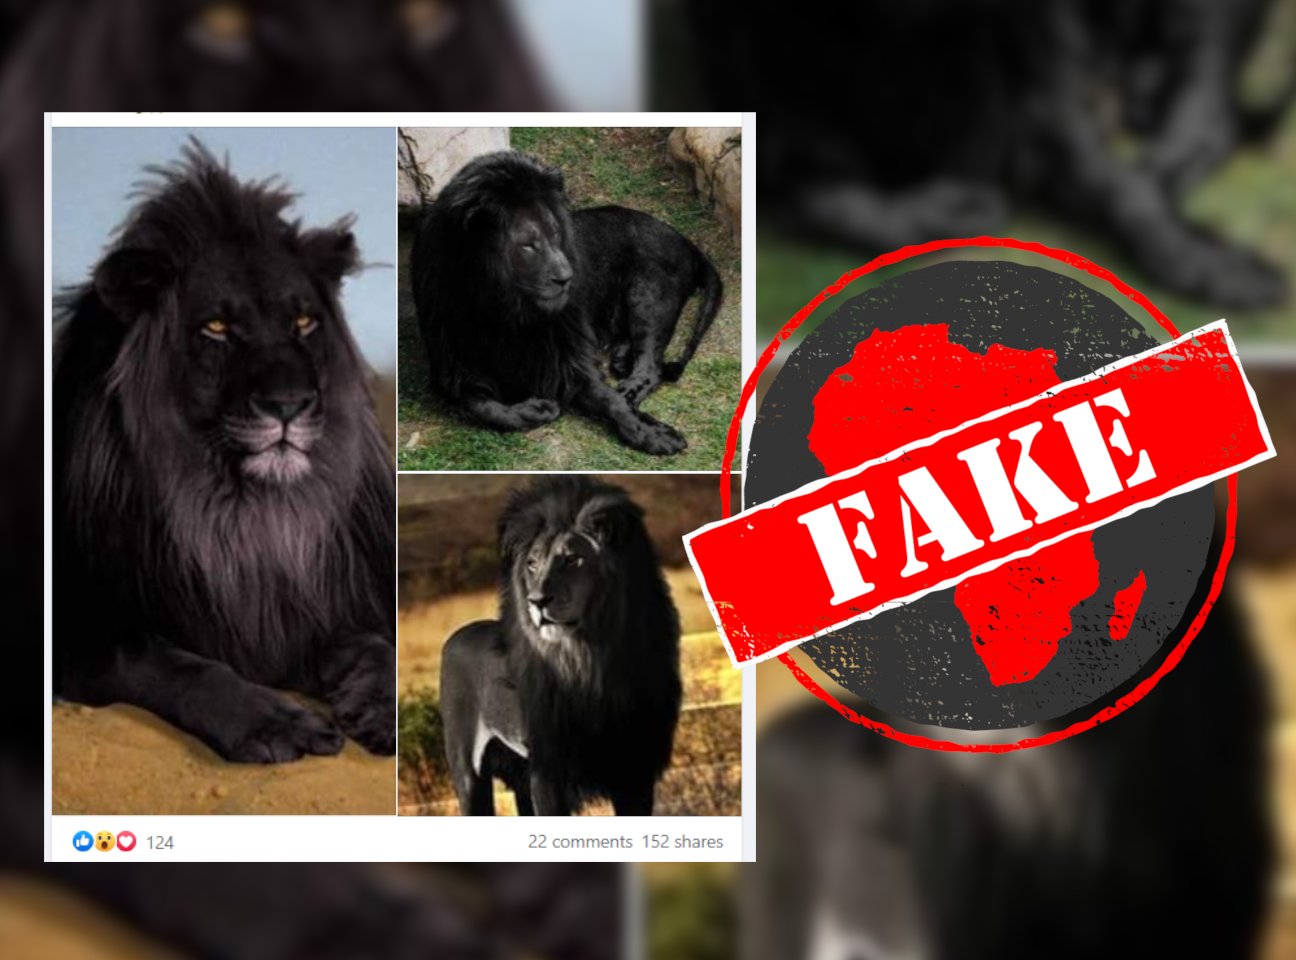 Completely black lions? No, photos doctored - Africa Check